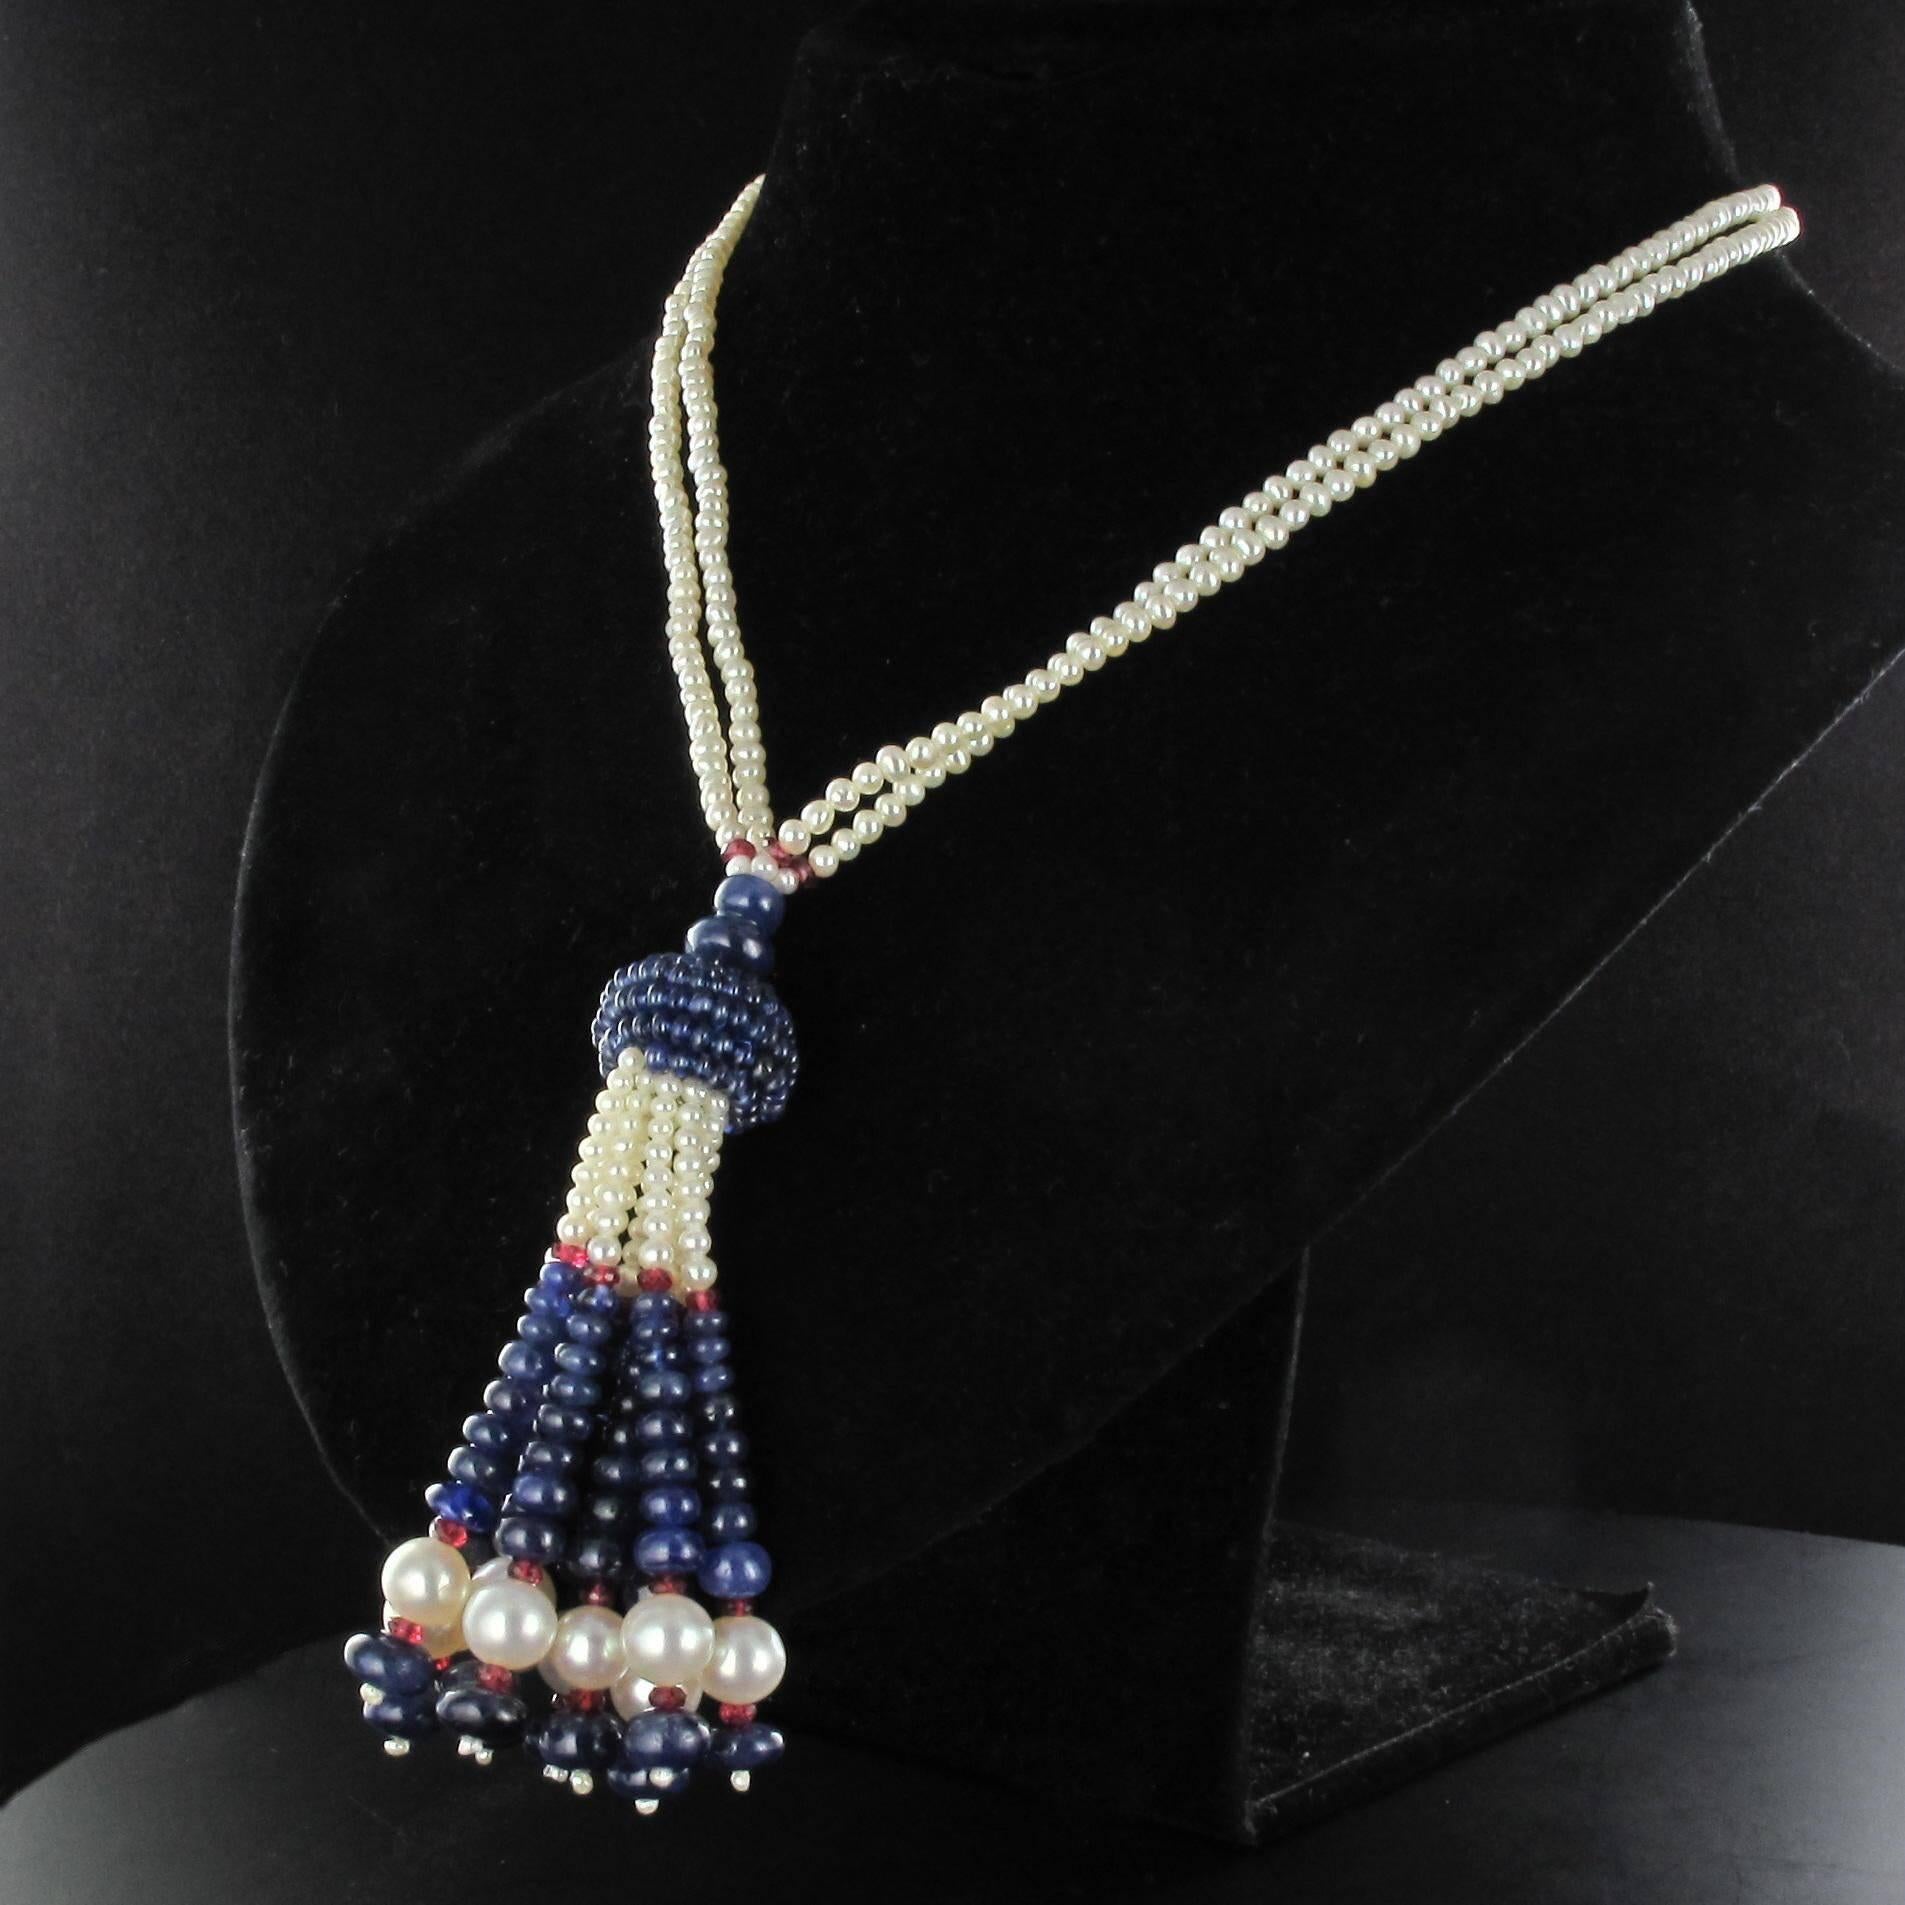 Sapphire Beads Cultured Pearls Tourmalines Beads Pompom Pendant Necklace  2